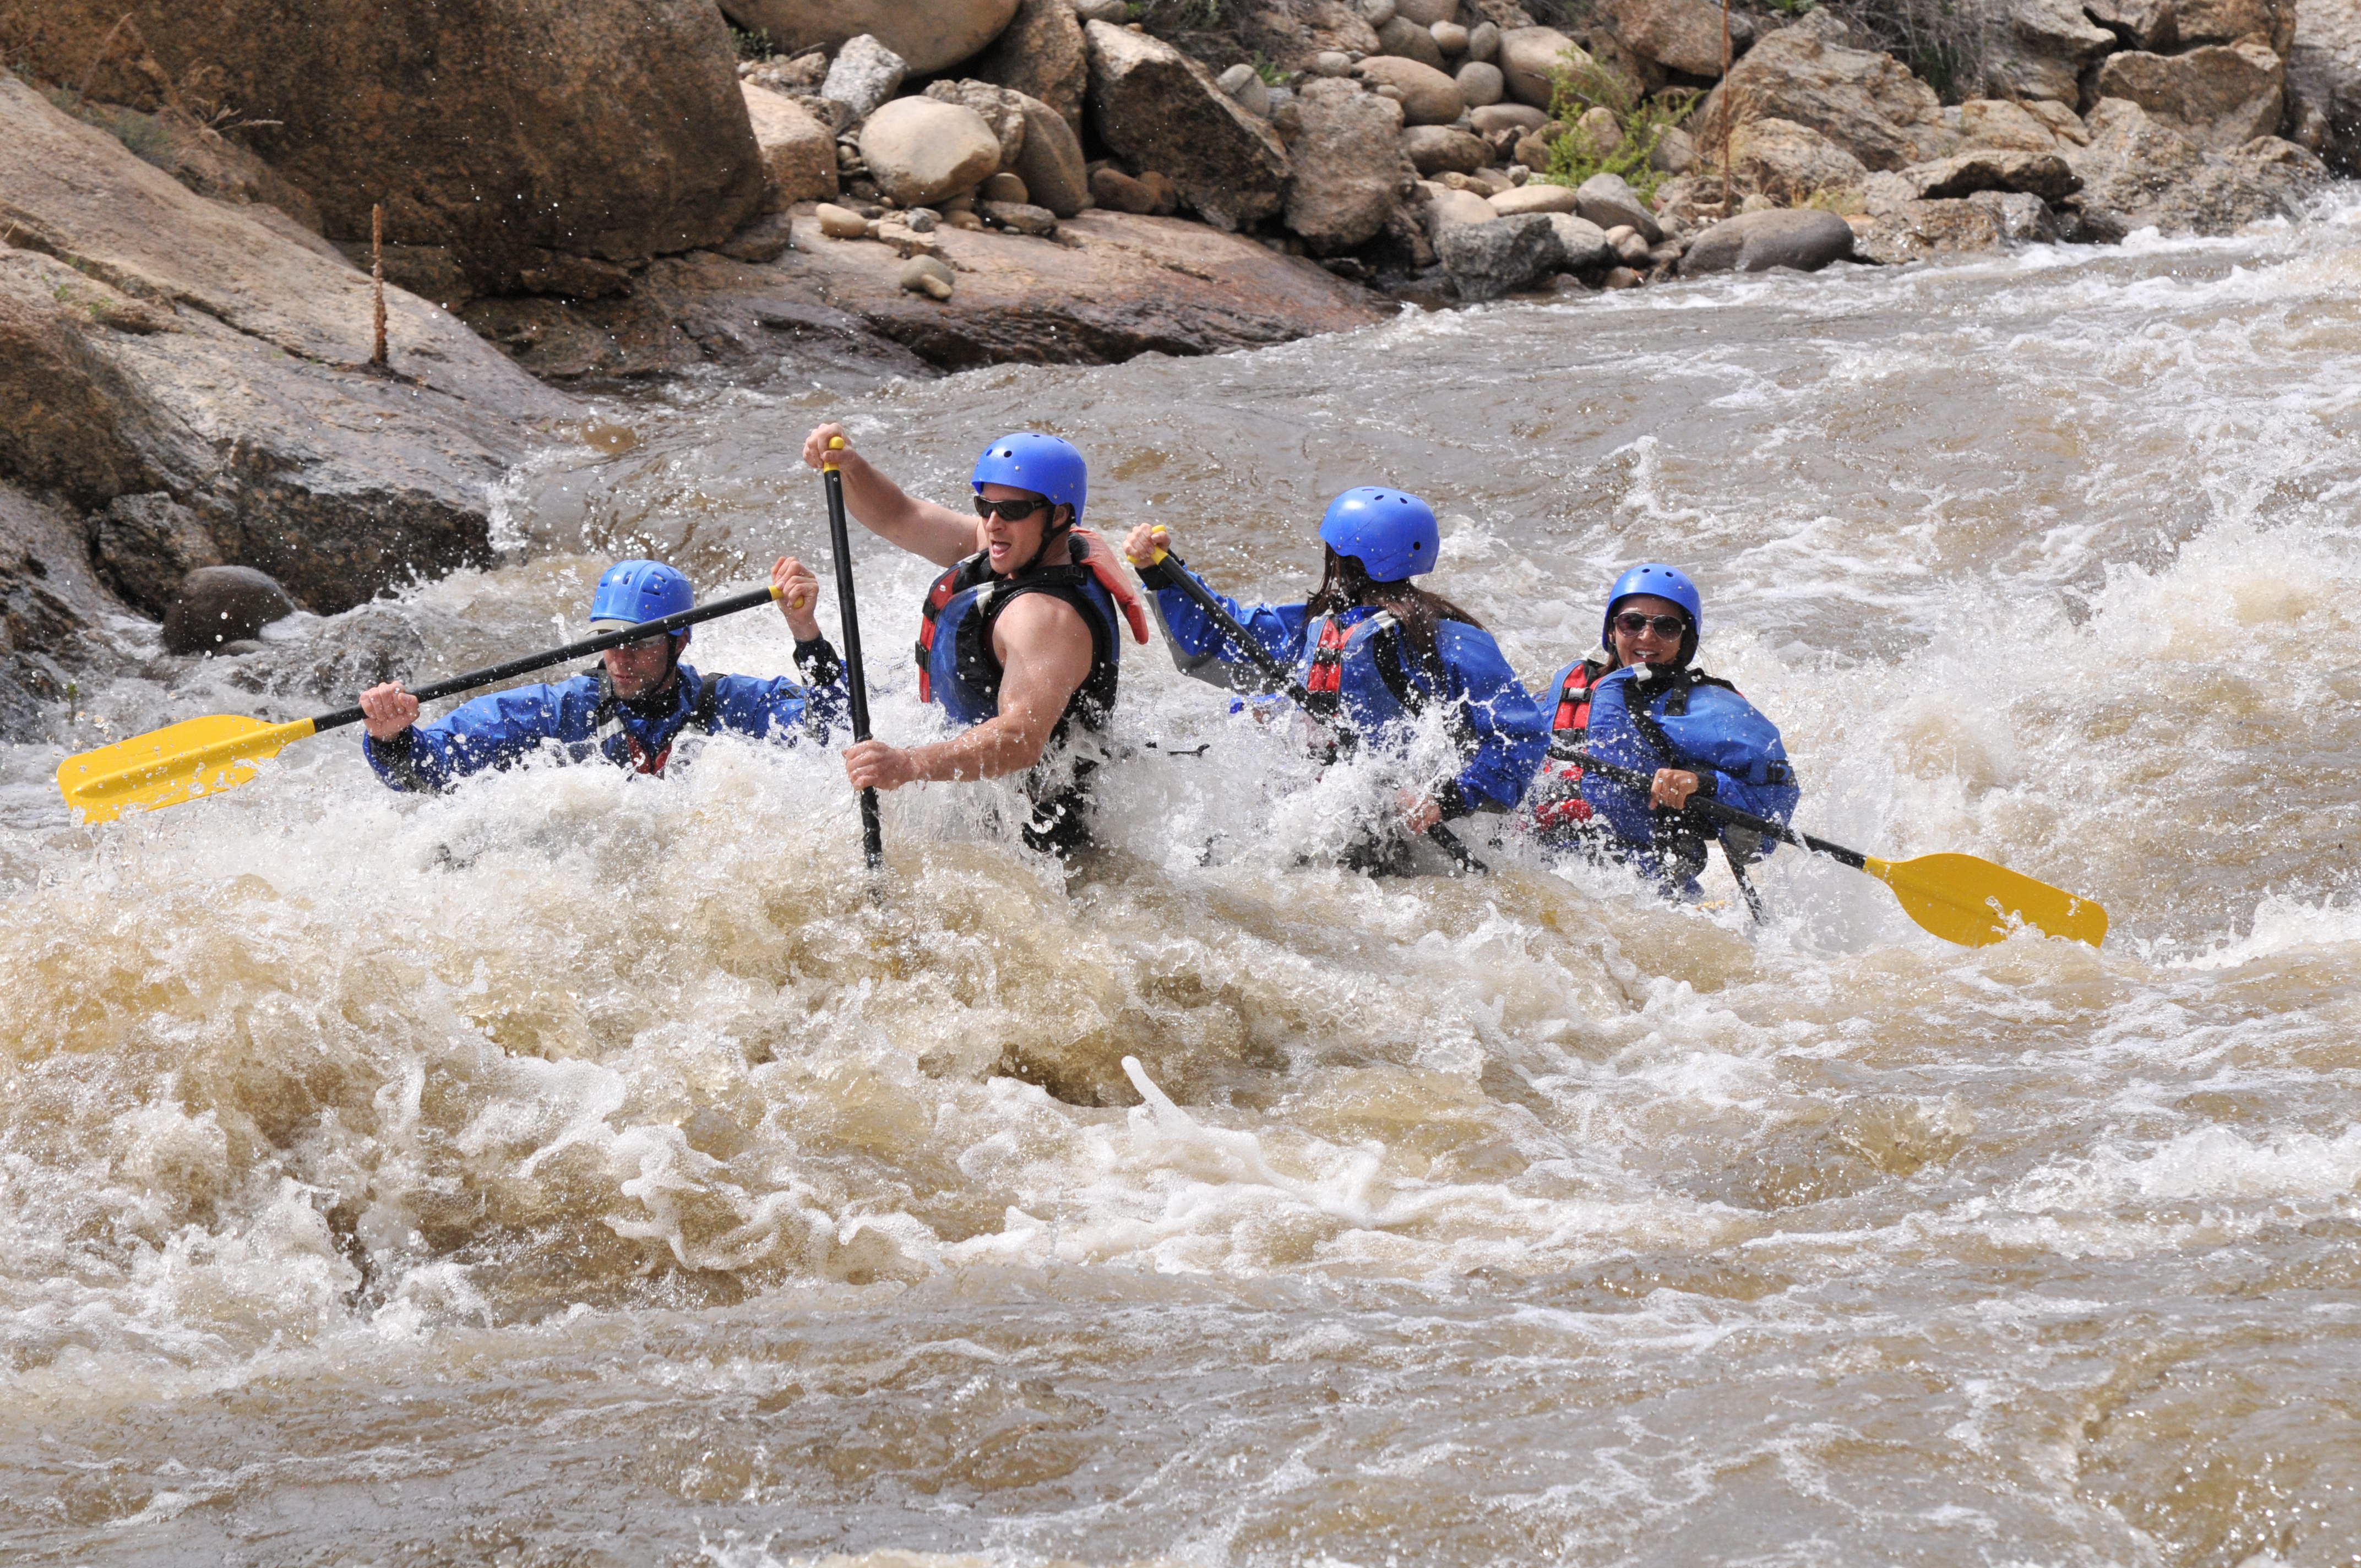 The Royal Gorge is open for commercial raft trips.